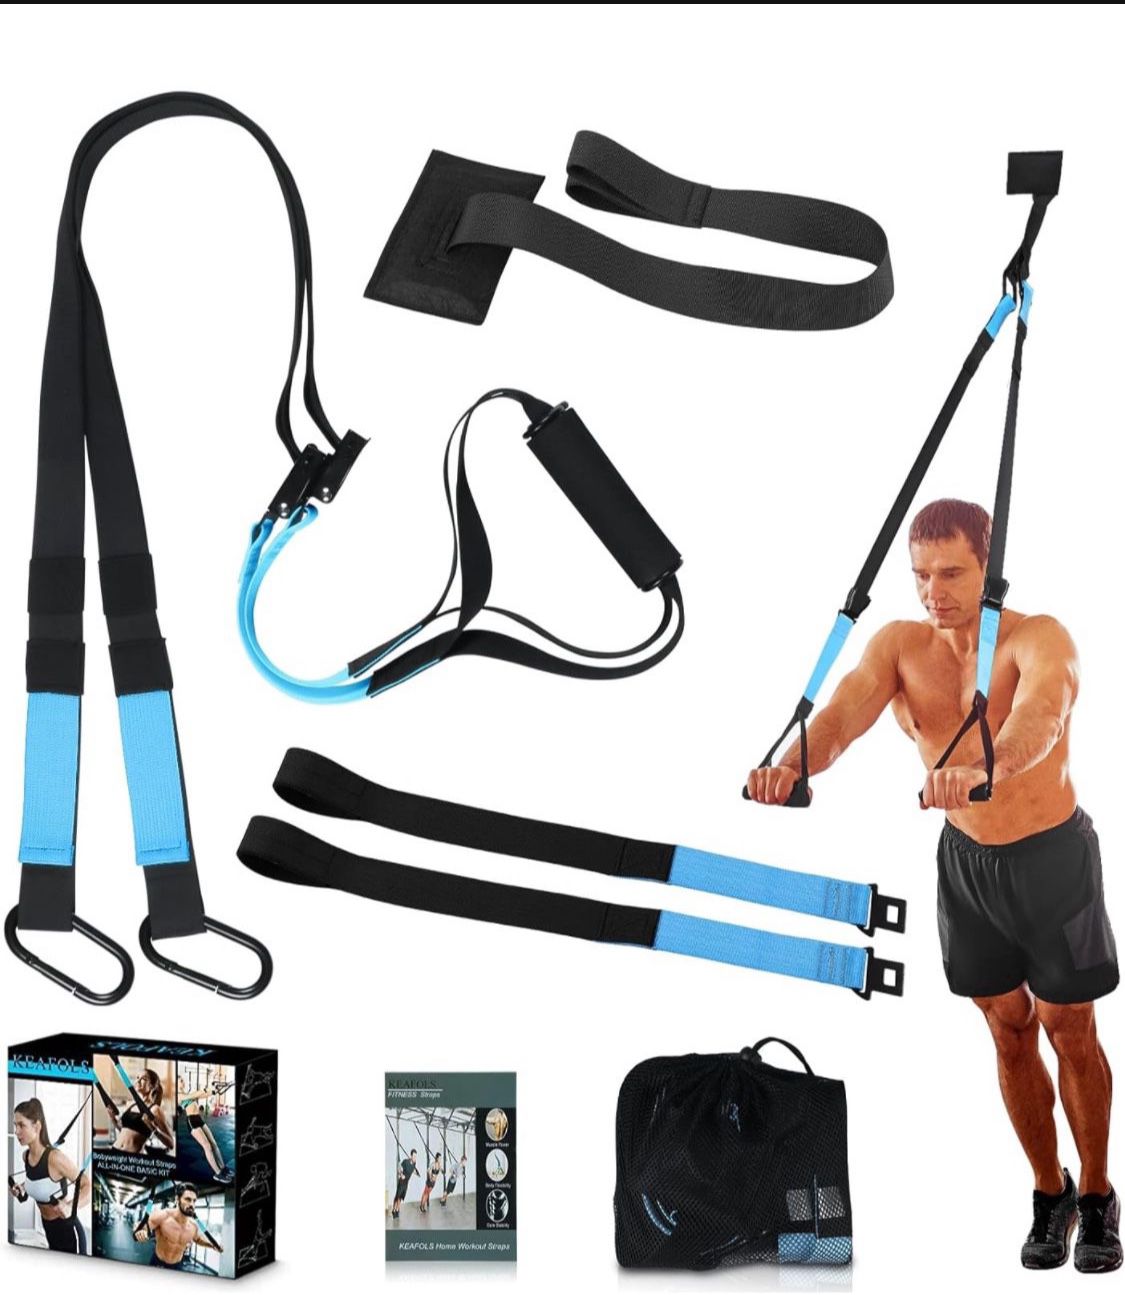 KEAFOLS Bodyweight Fitness Extension Resistance Suspension Kit, Door Anchors, Power Lifting Strength Training Straps, Full Body Home Gym Body Core Exe